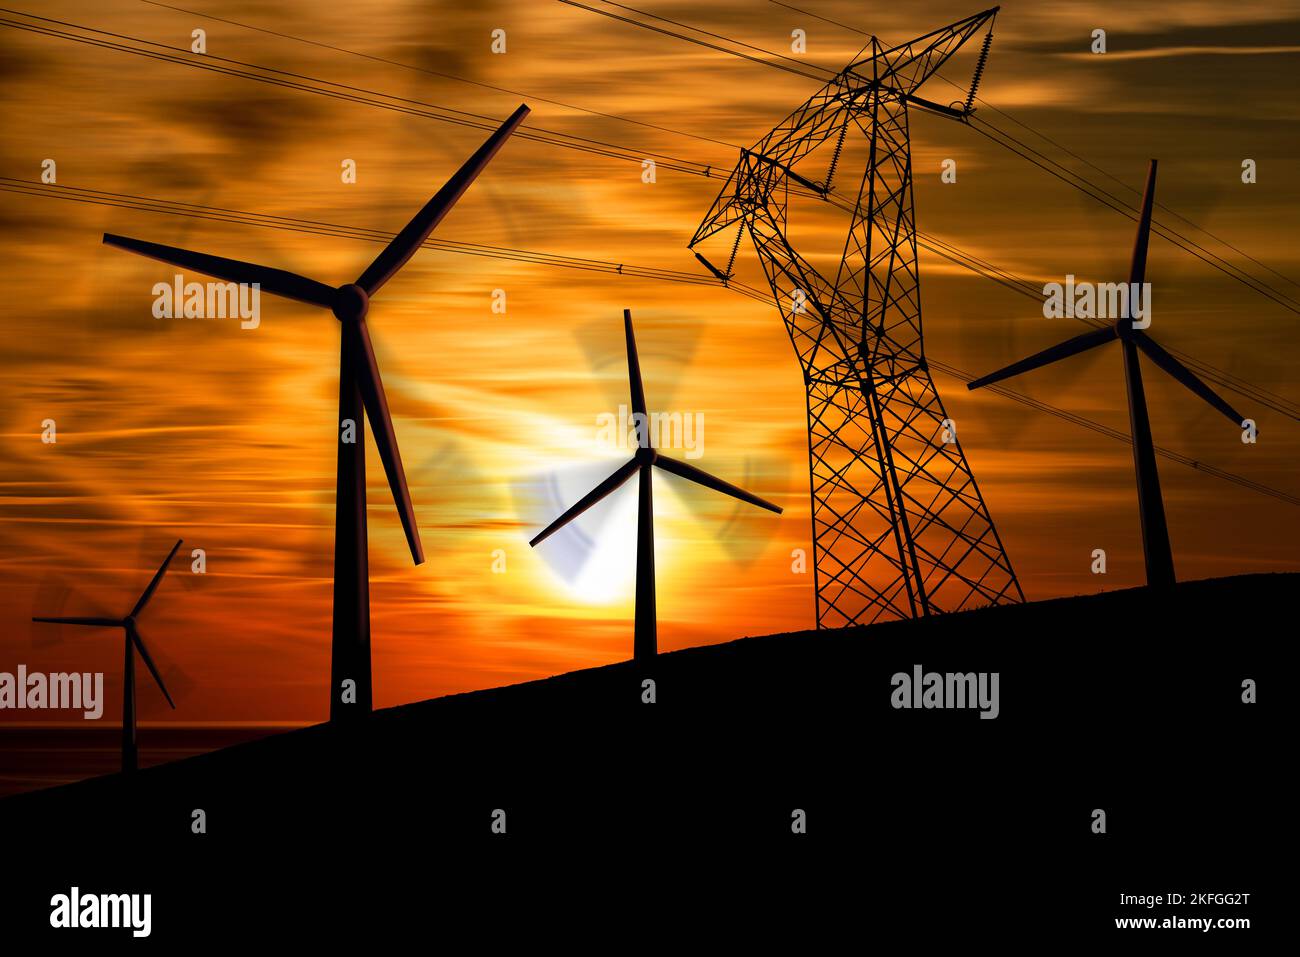 Group of wind turbines and a high voltage tower, power line with electric cables and insulators against a beautiful sky at sunset with clouds. Stock Photo